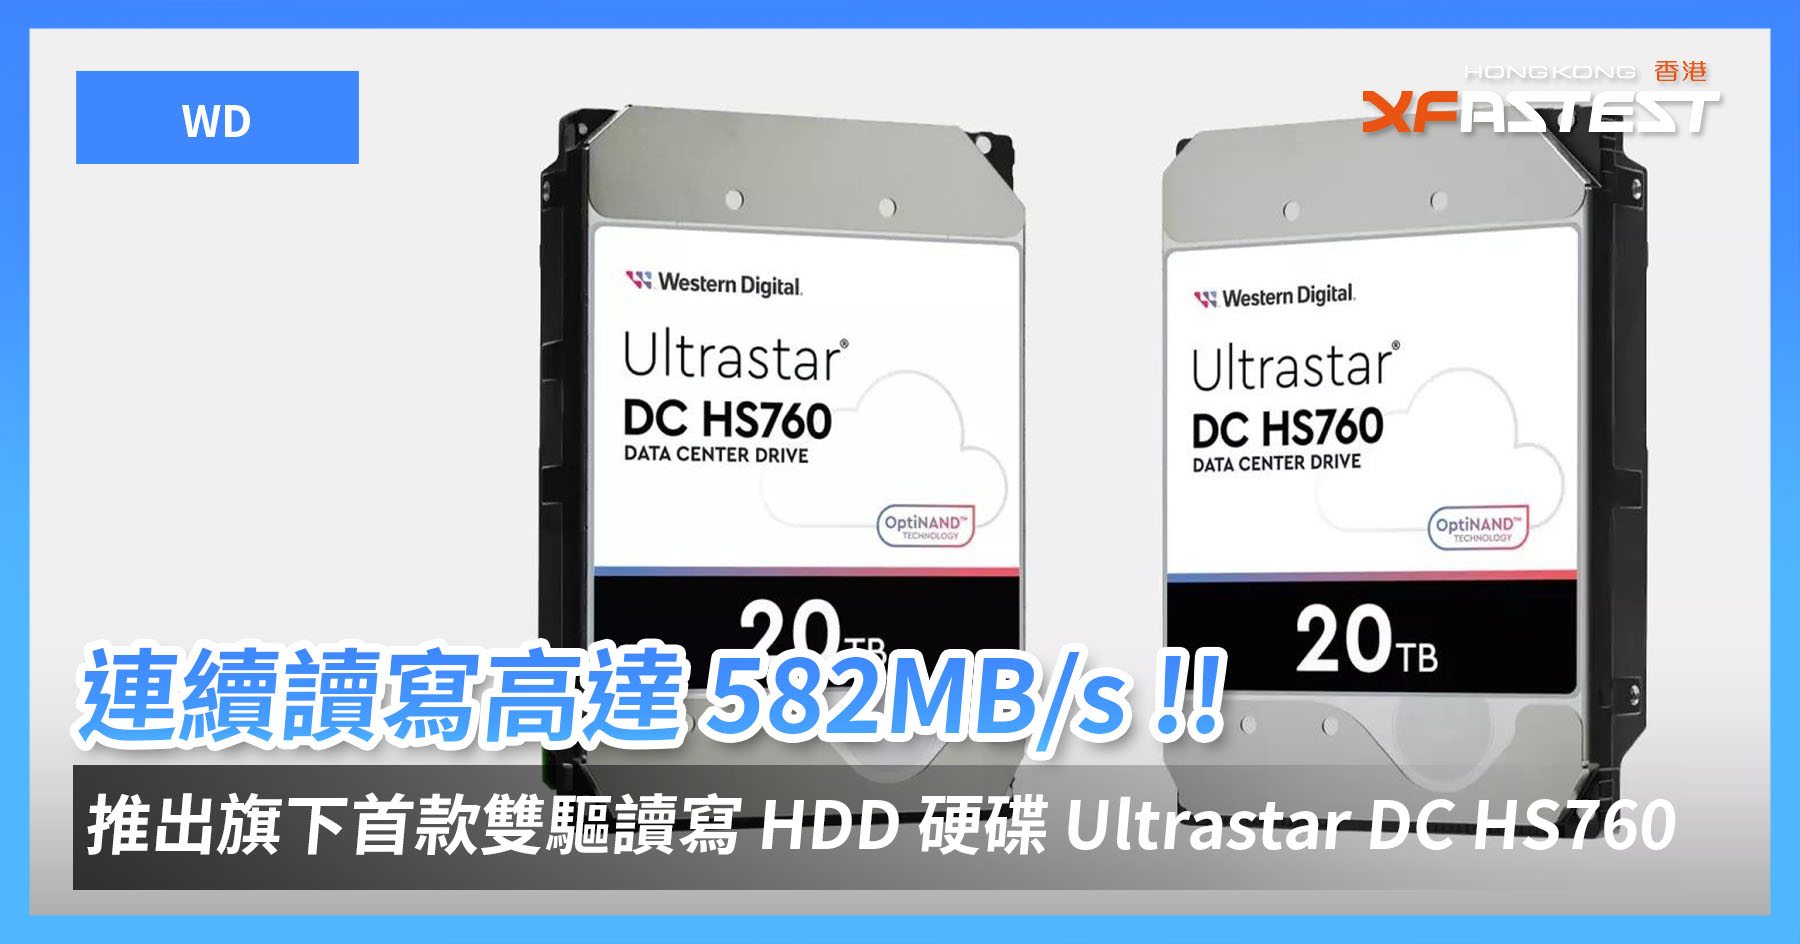 Sequential reading and writing up to 582MB/s!! WD launched its first dual-drive HDD HDD Ultrastar DC HS760